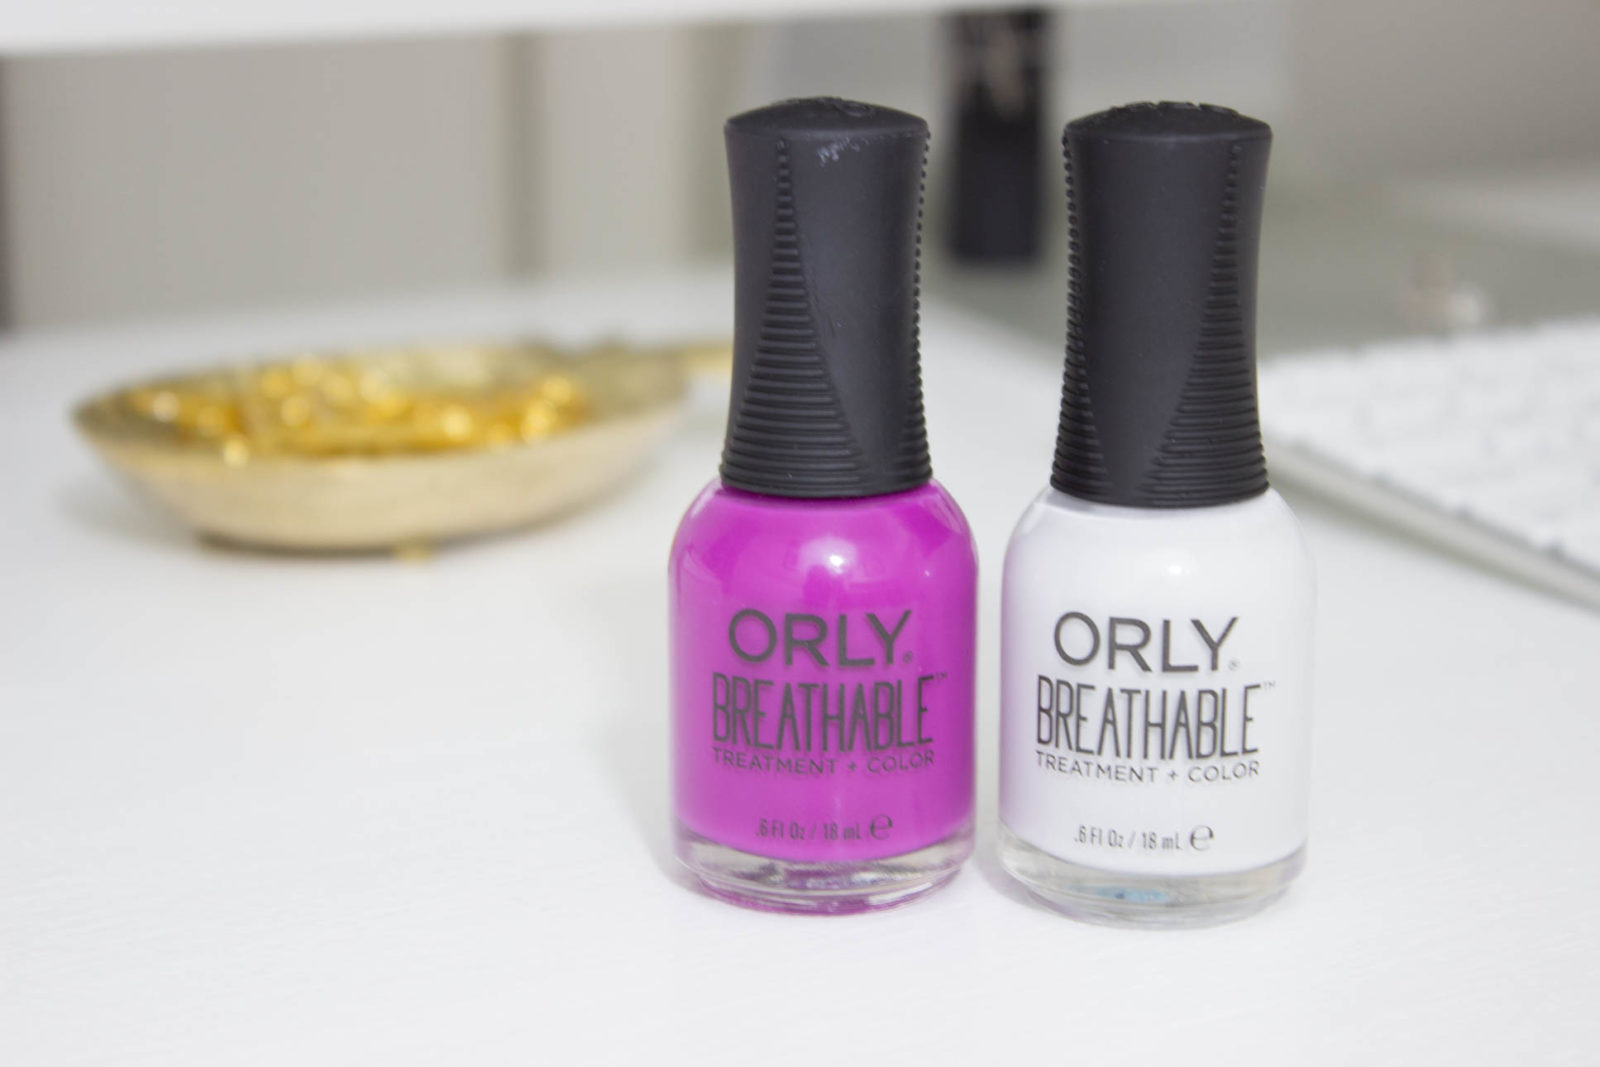 10. Orly Breathable Treatment + Color Nail Polish in "Nourishing Nude" - wide 8